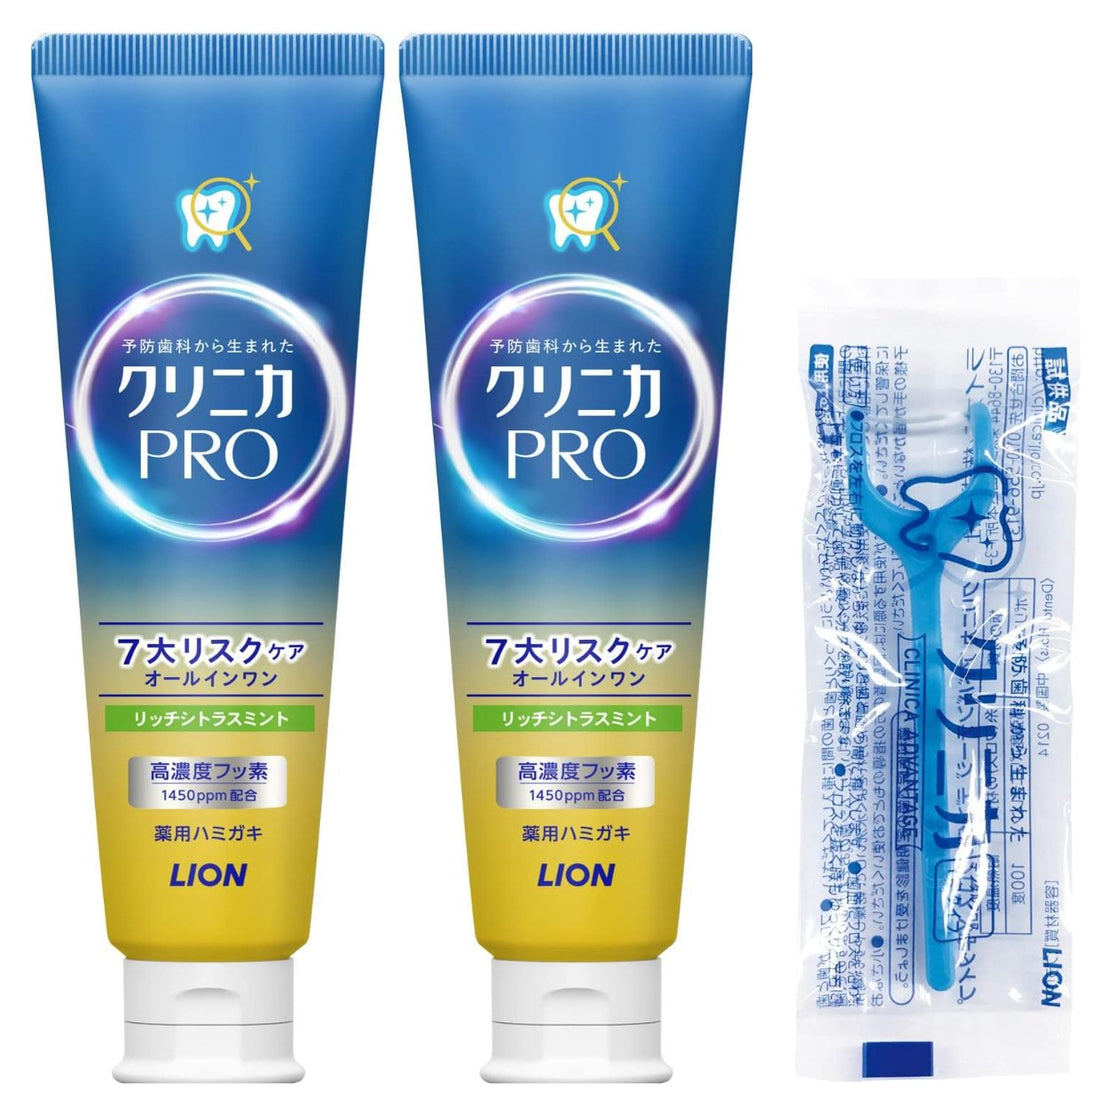 Clinica PRO [Quasi-drug] All-in-one Toothpaste Rich Citrus Mint Toothpaste Fluoride Periodontal Disease 95g x 2 + Floss Included - NihonMura